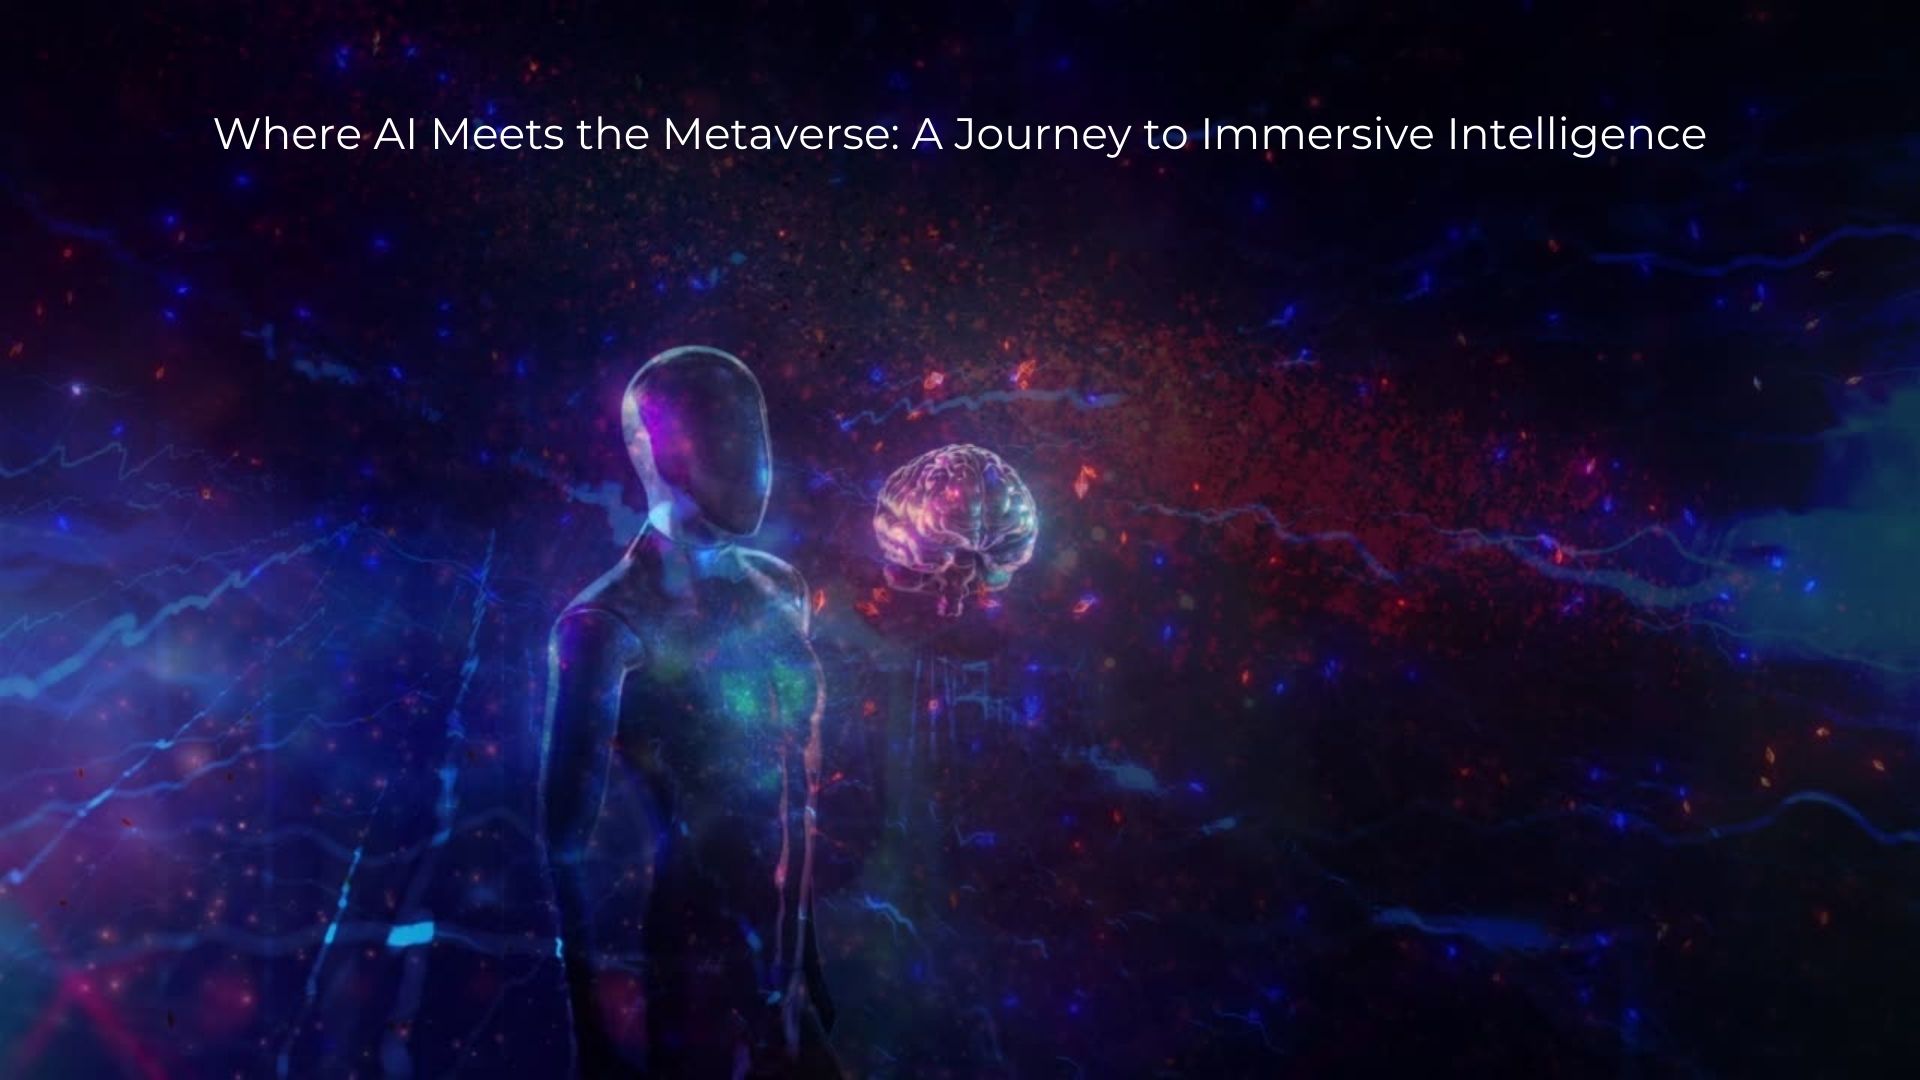 Exploring the Metaverse: A Journey into the Immersive Digital Universe